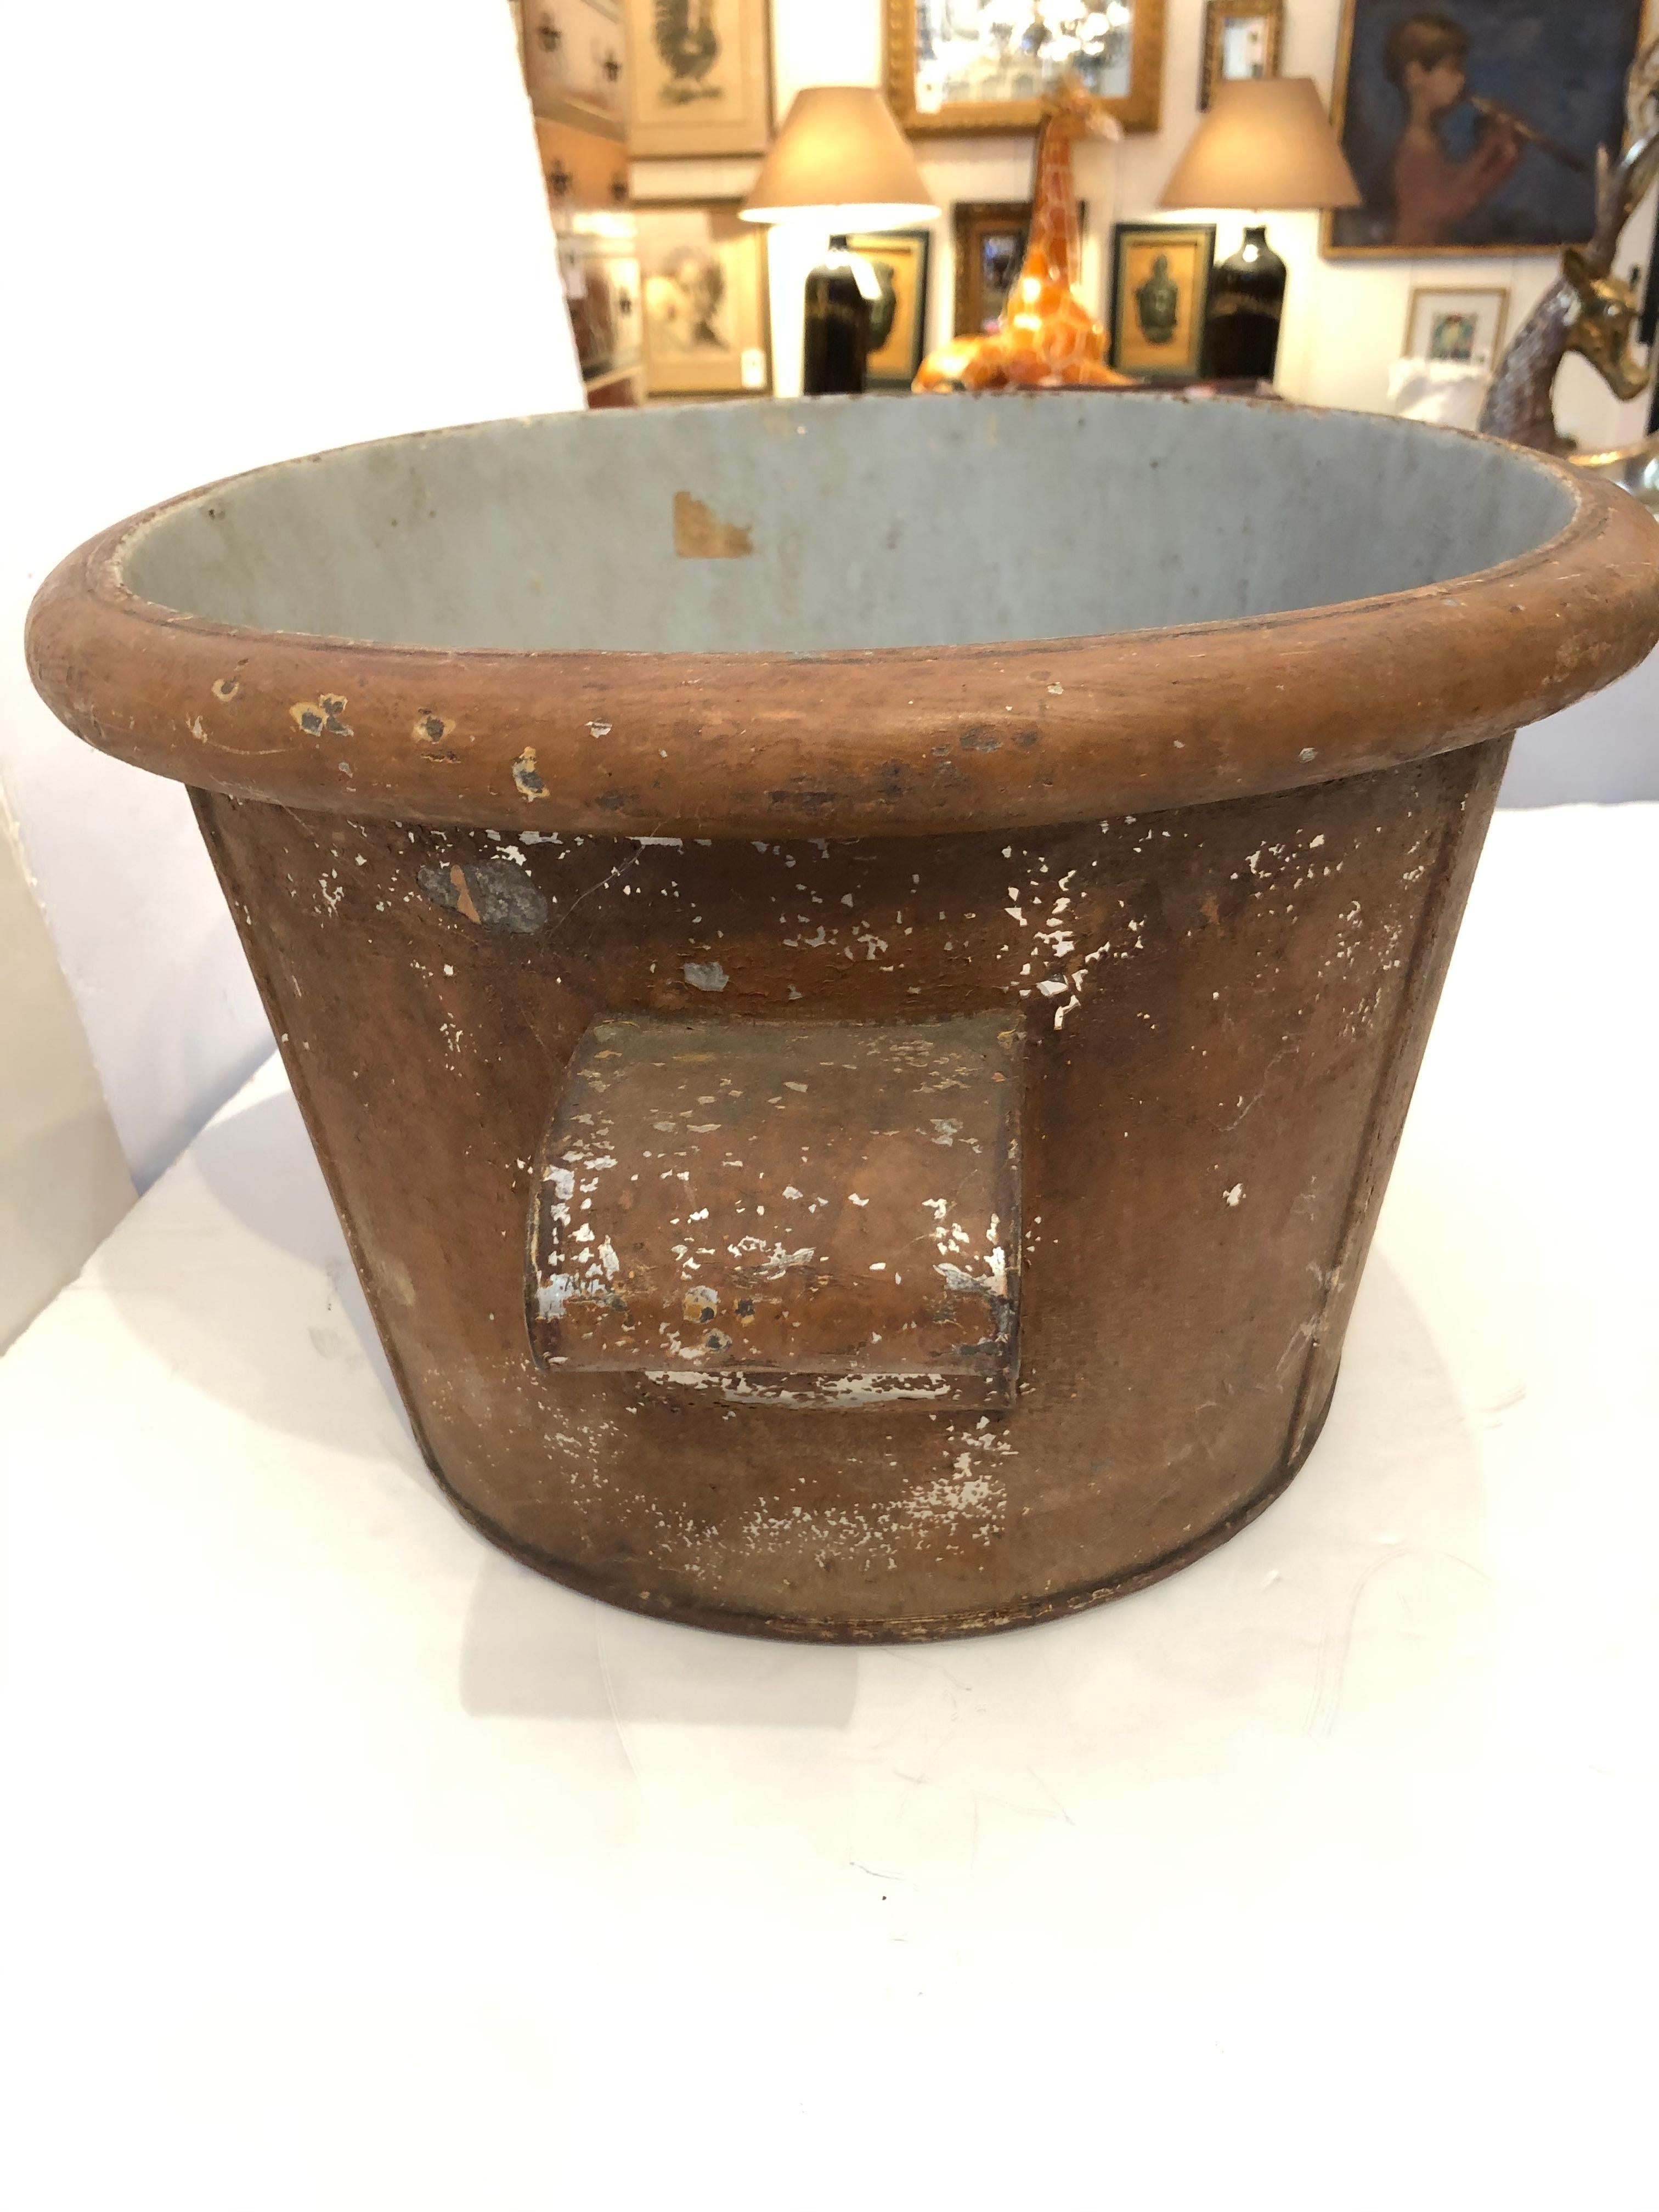 Fabulous weathered metal oval washbasin planter having marvelous light blue interior and rusty exterior. Would make a great centerpiece.
Opening 20.5 W.